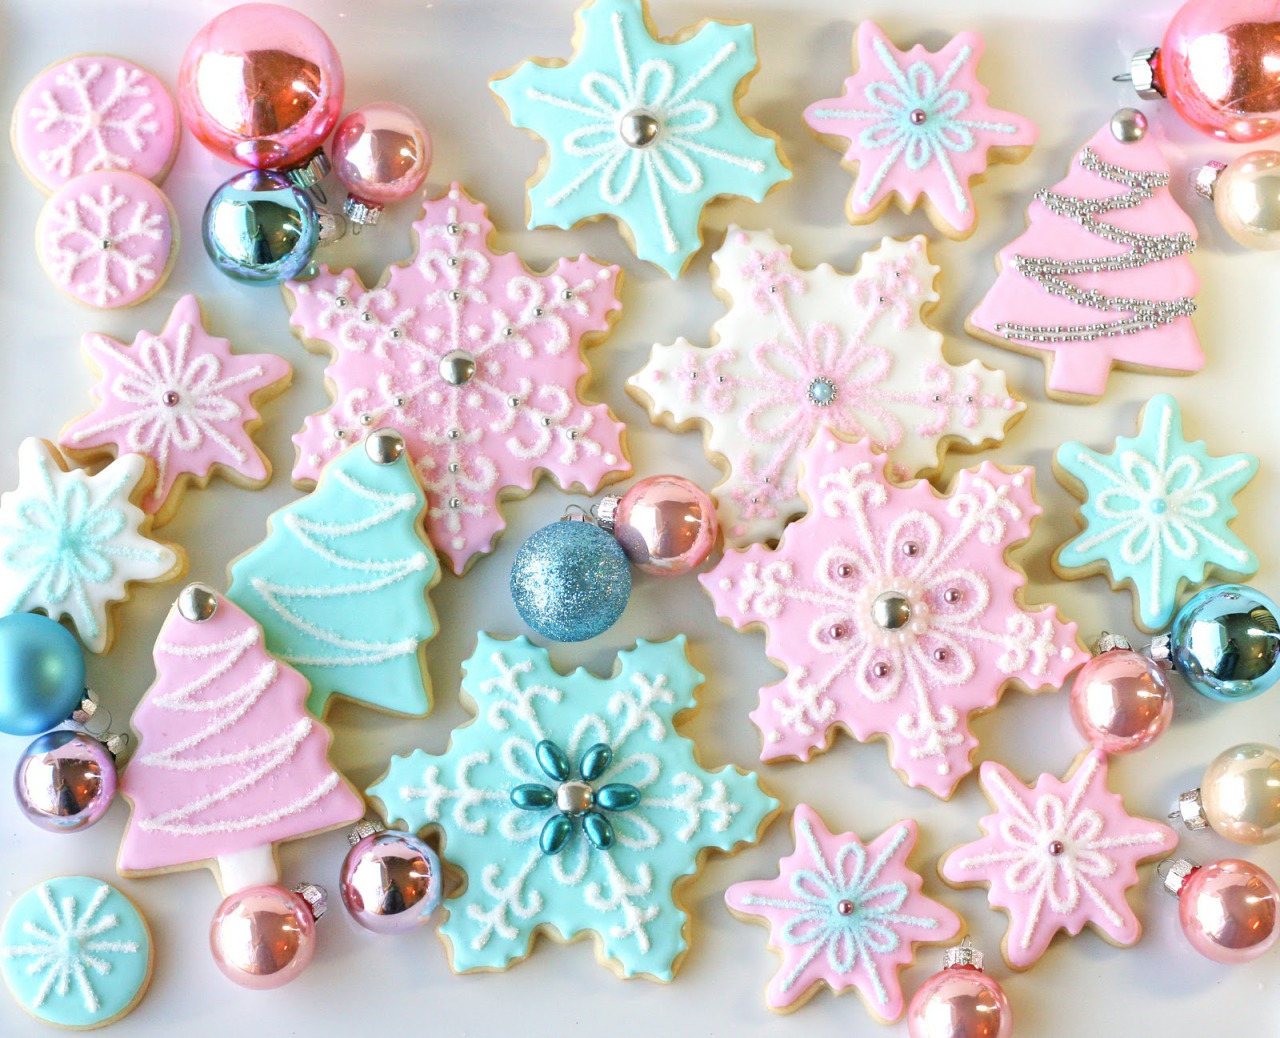 Photos of New Year's cookies